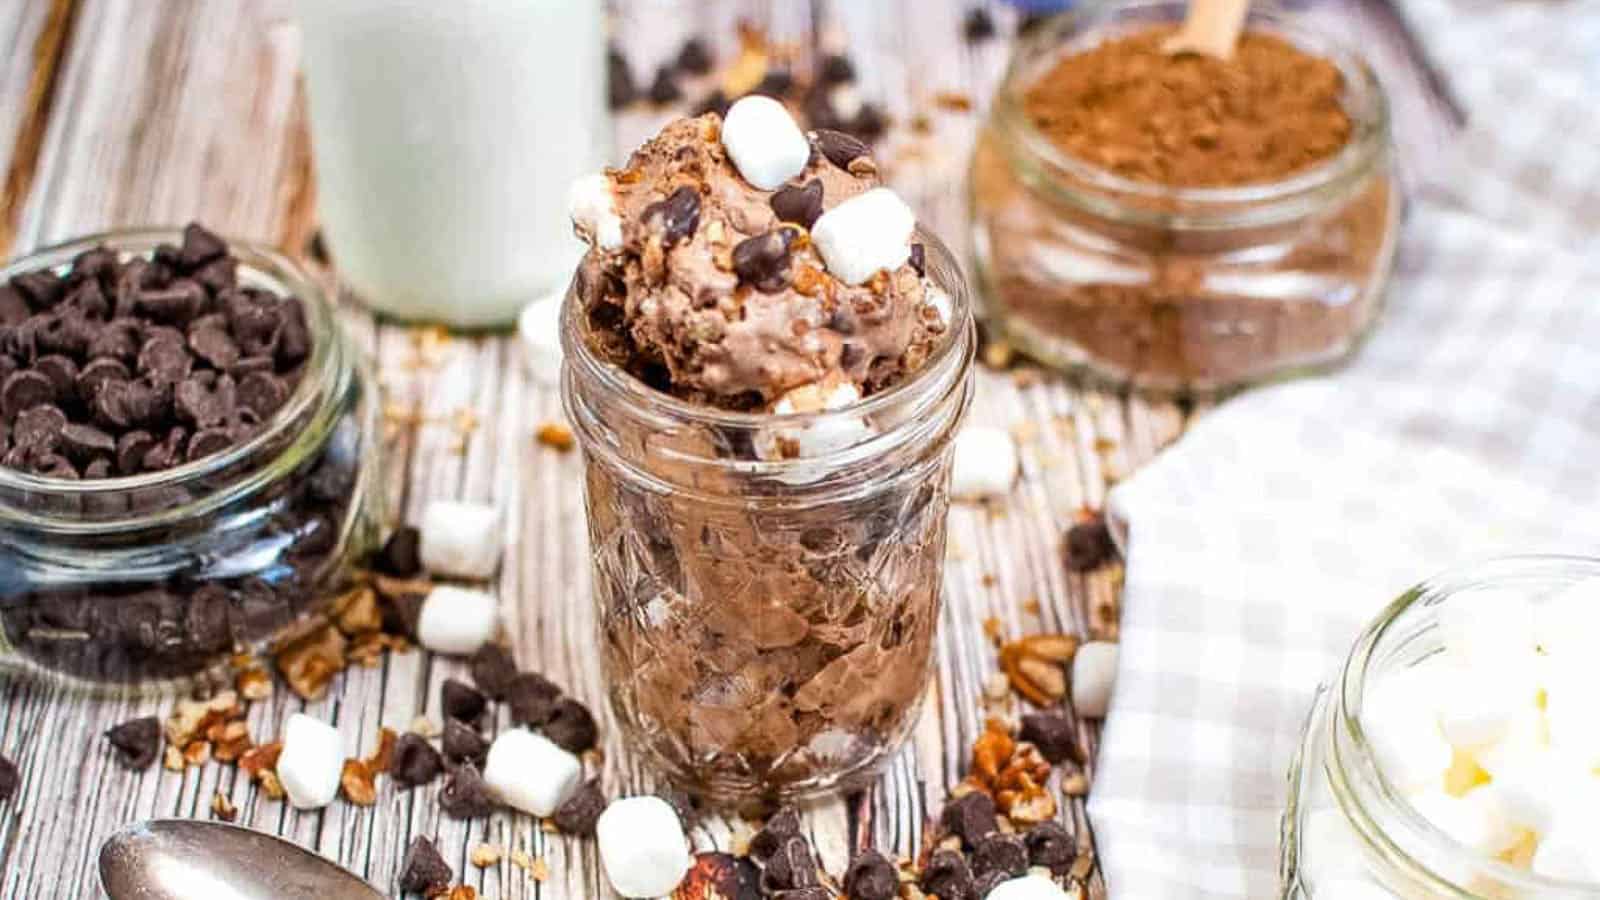 A jar of Rocky Road Ice Cream on a table with ingredients scattered around.